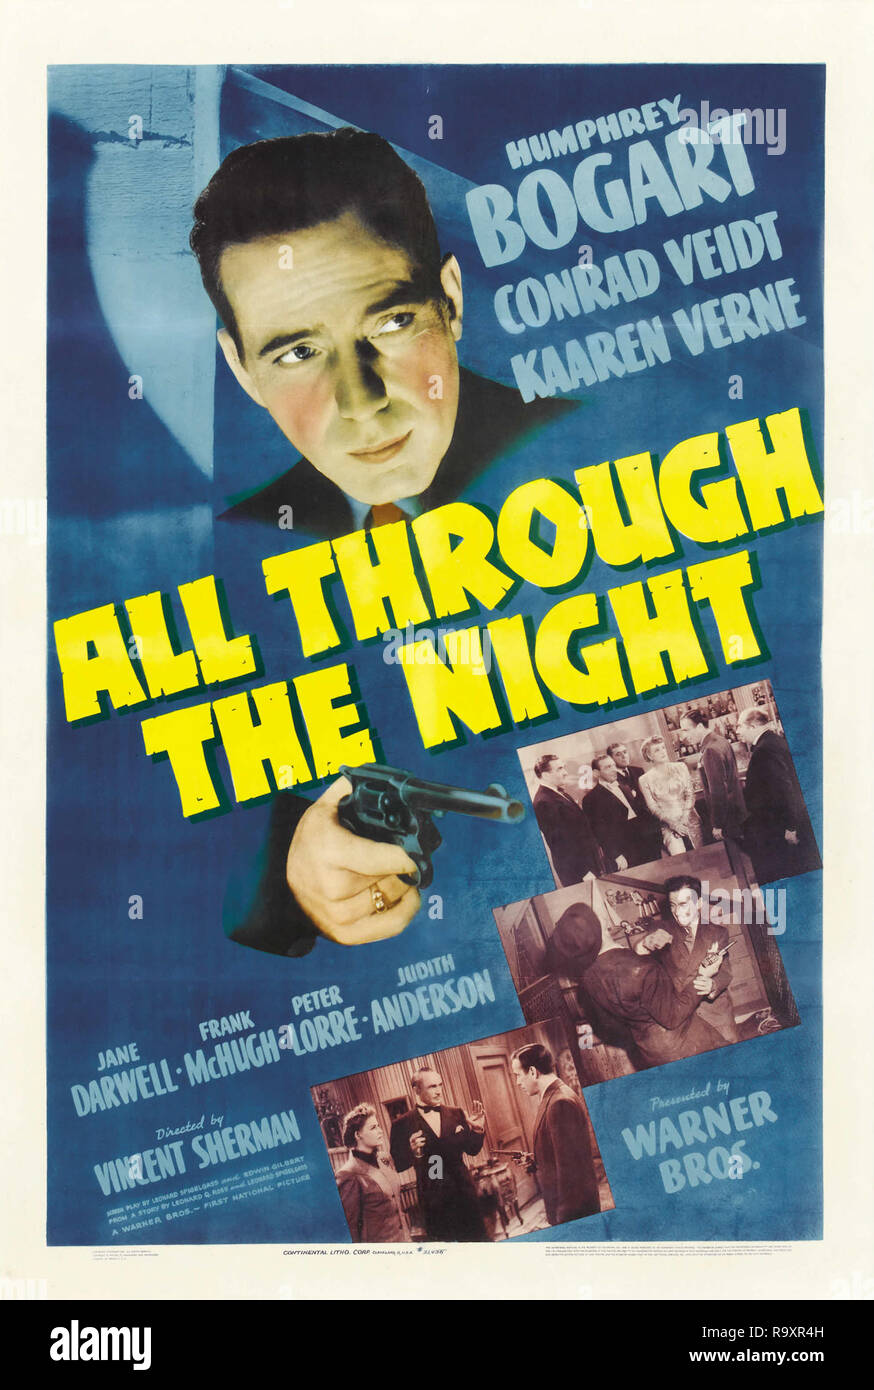 All Through the Night (Warner Brothers, 1942) Poster  Humphrey Bogart  File Reference # 33635 937THA Stock Photo